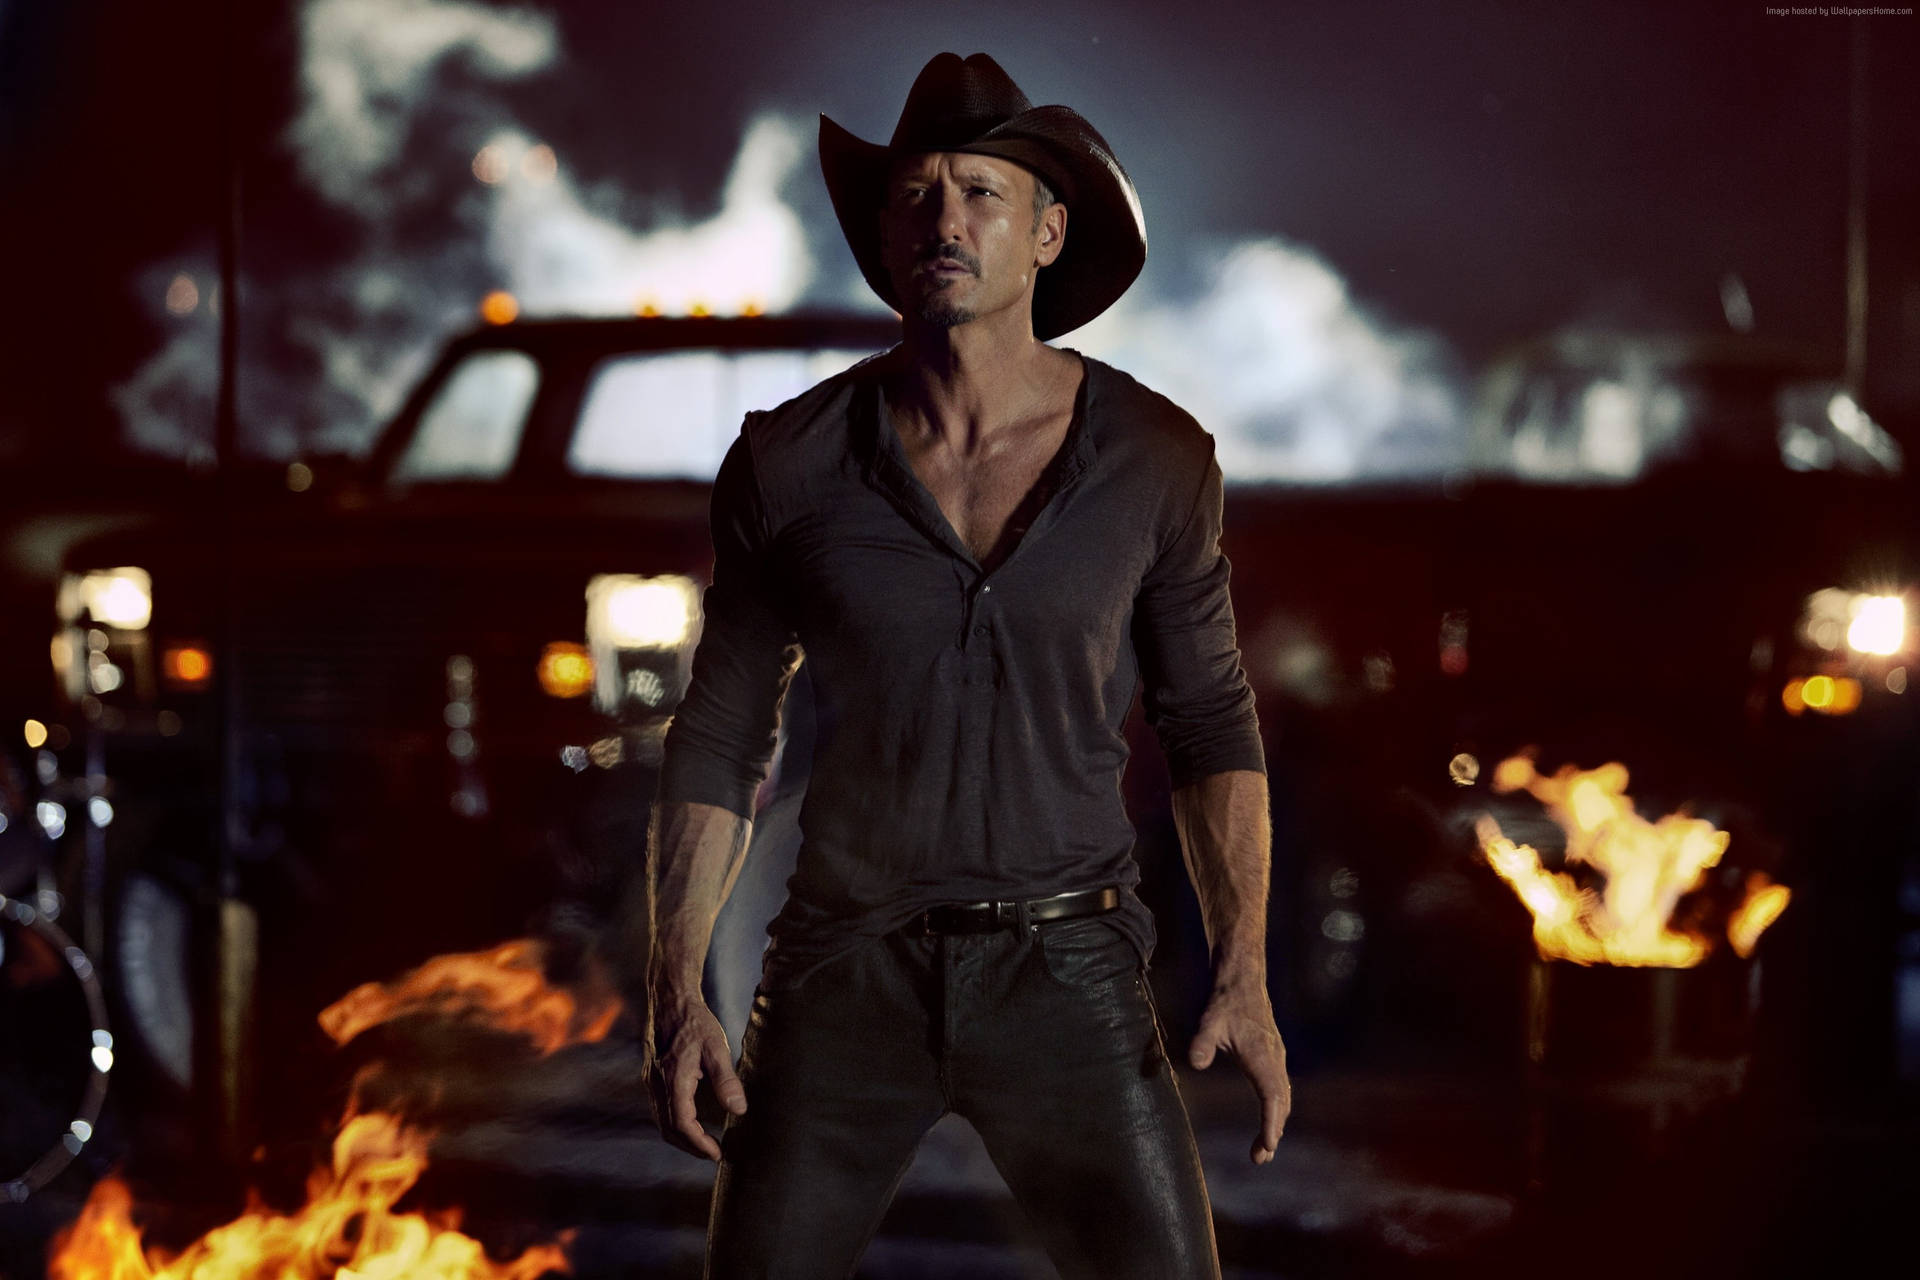 Tim Mcgraw Cars And Burning Cans